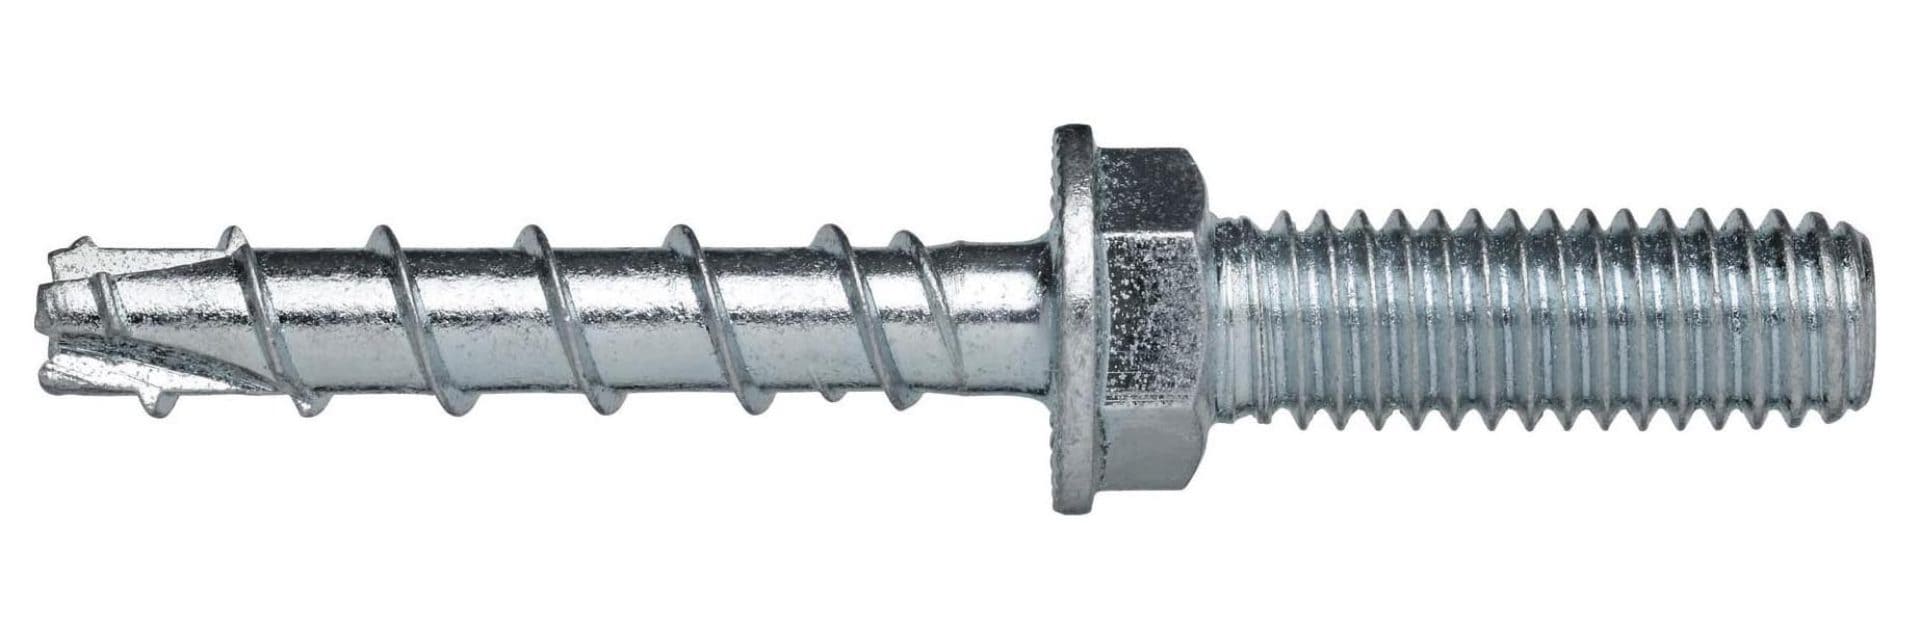 https://www.hilti.com/content/hilti/W1/US/en/business/applications/threaded-rod-hangers/_jcr_content/childSections/childsection/three_image_text_col/image_text_column_1_/image.img.1920.medium.jpg/1601587275280.jpg